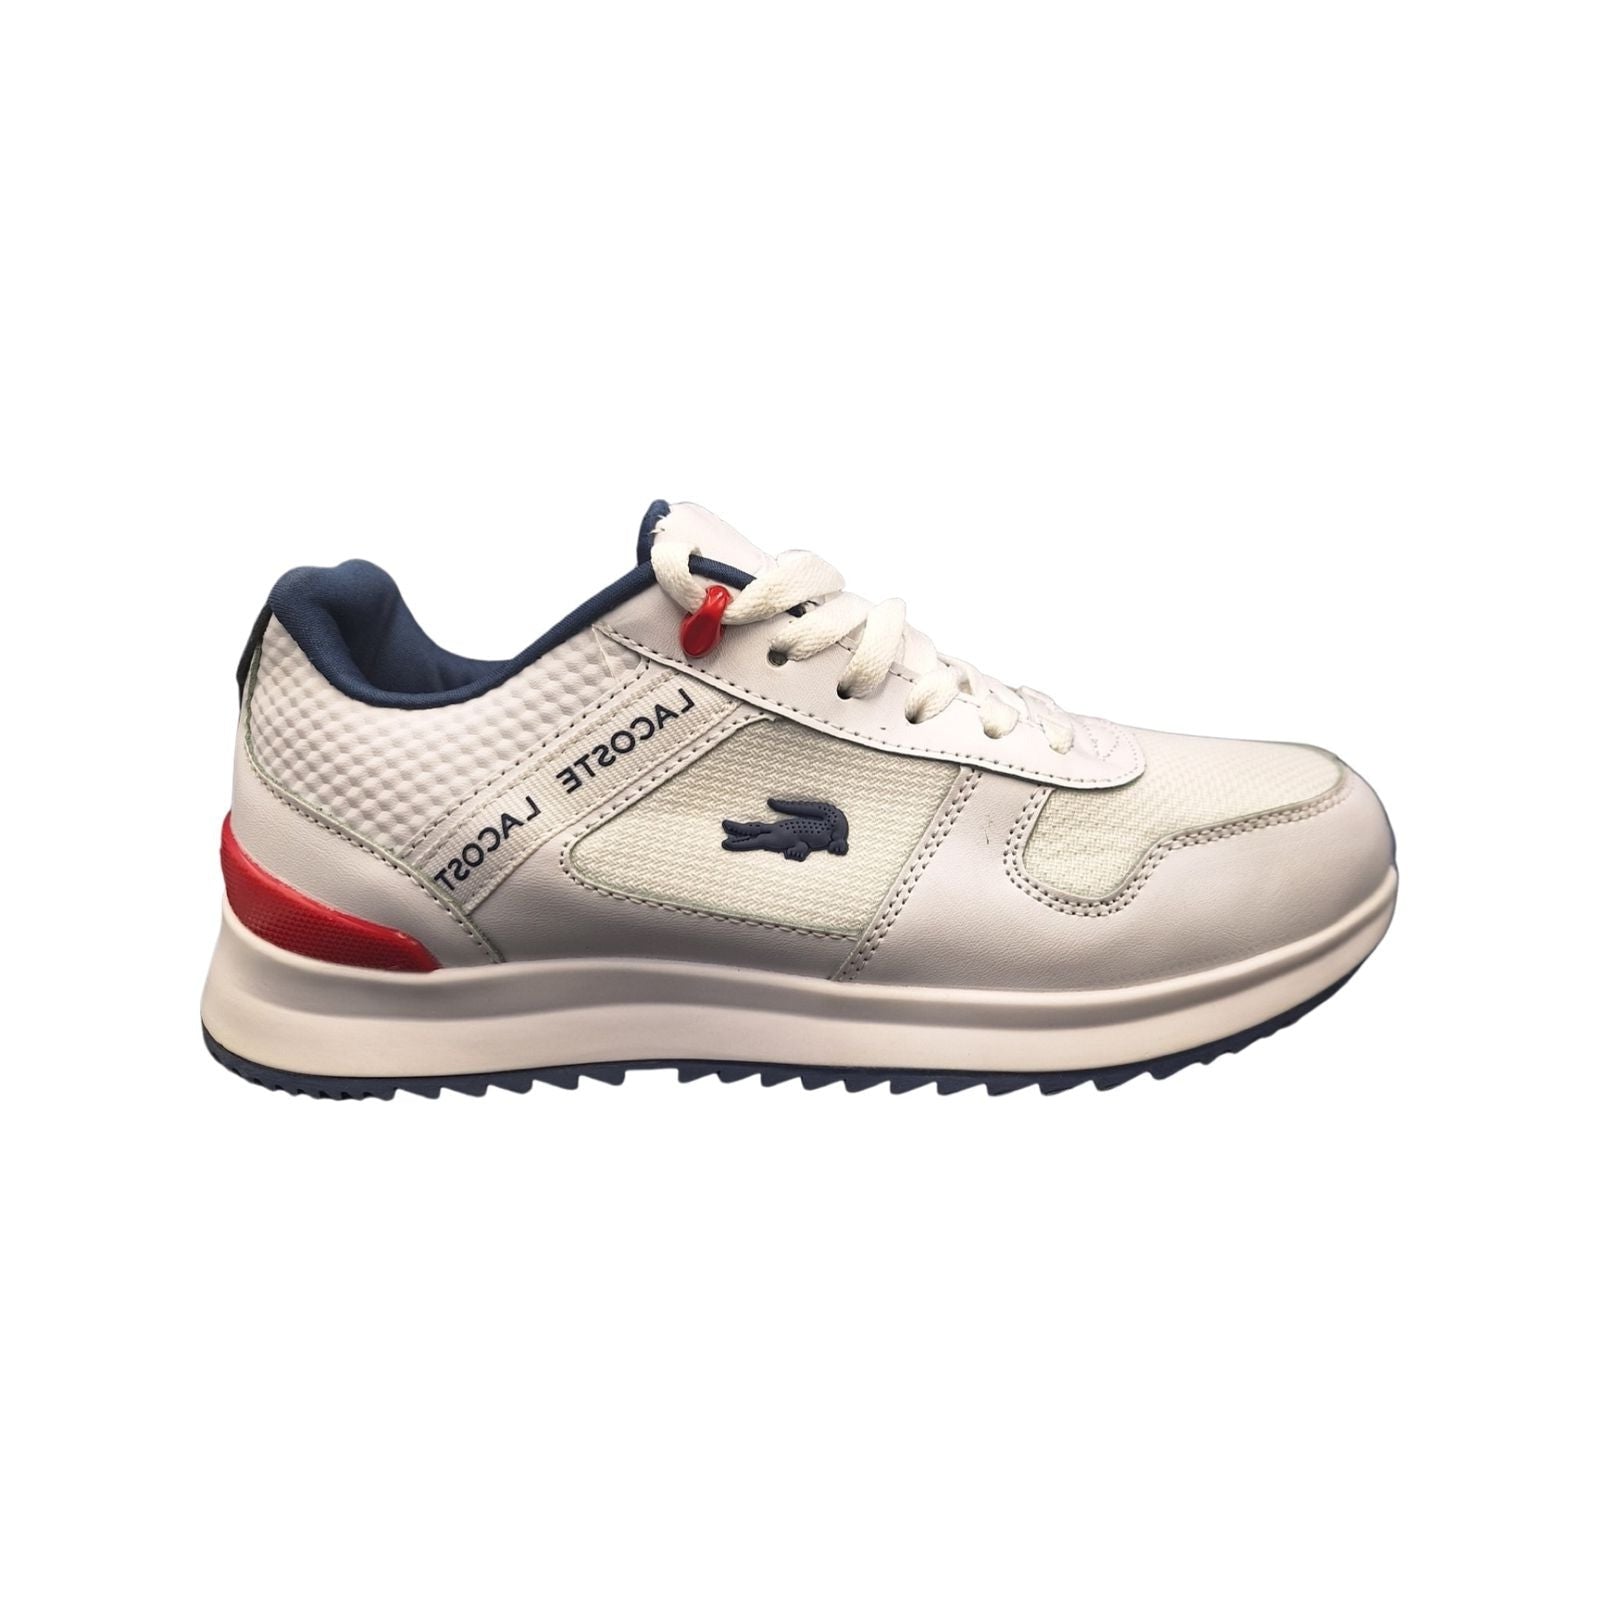 Lacoste Partner Luxe White - Soleful